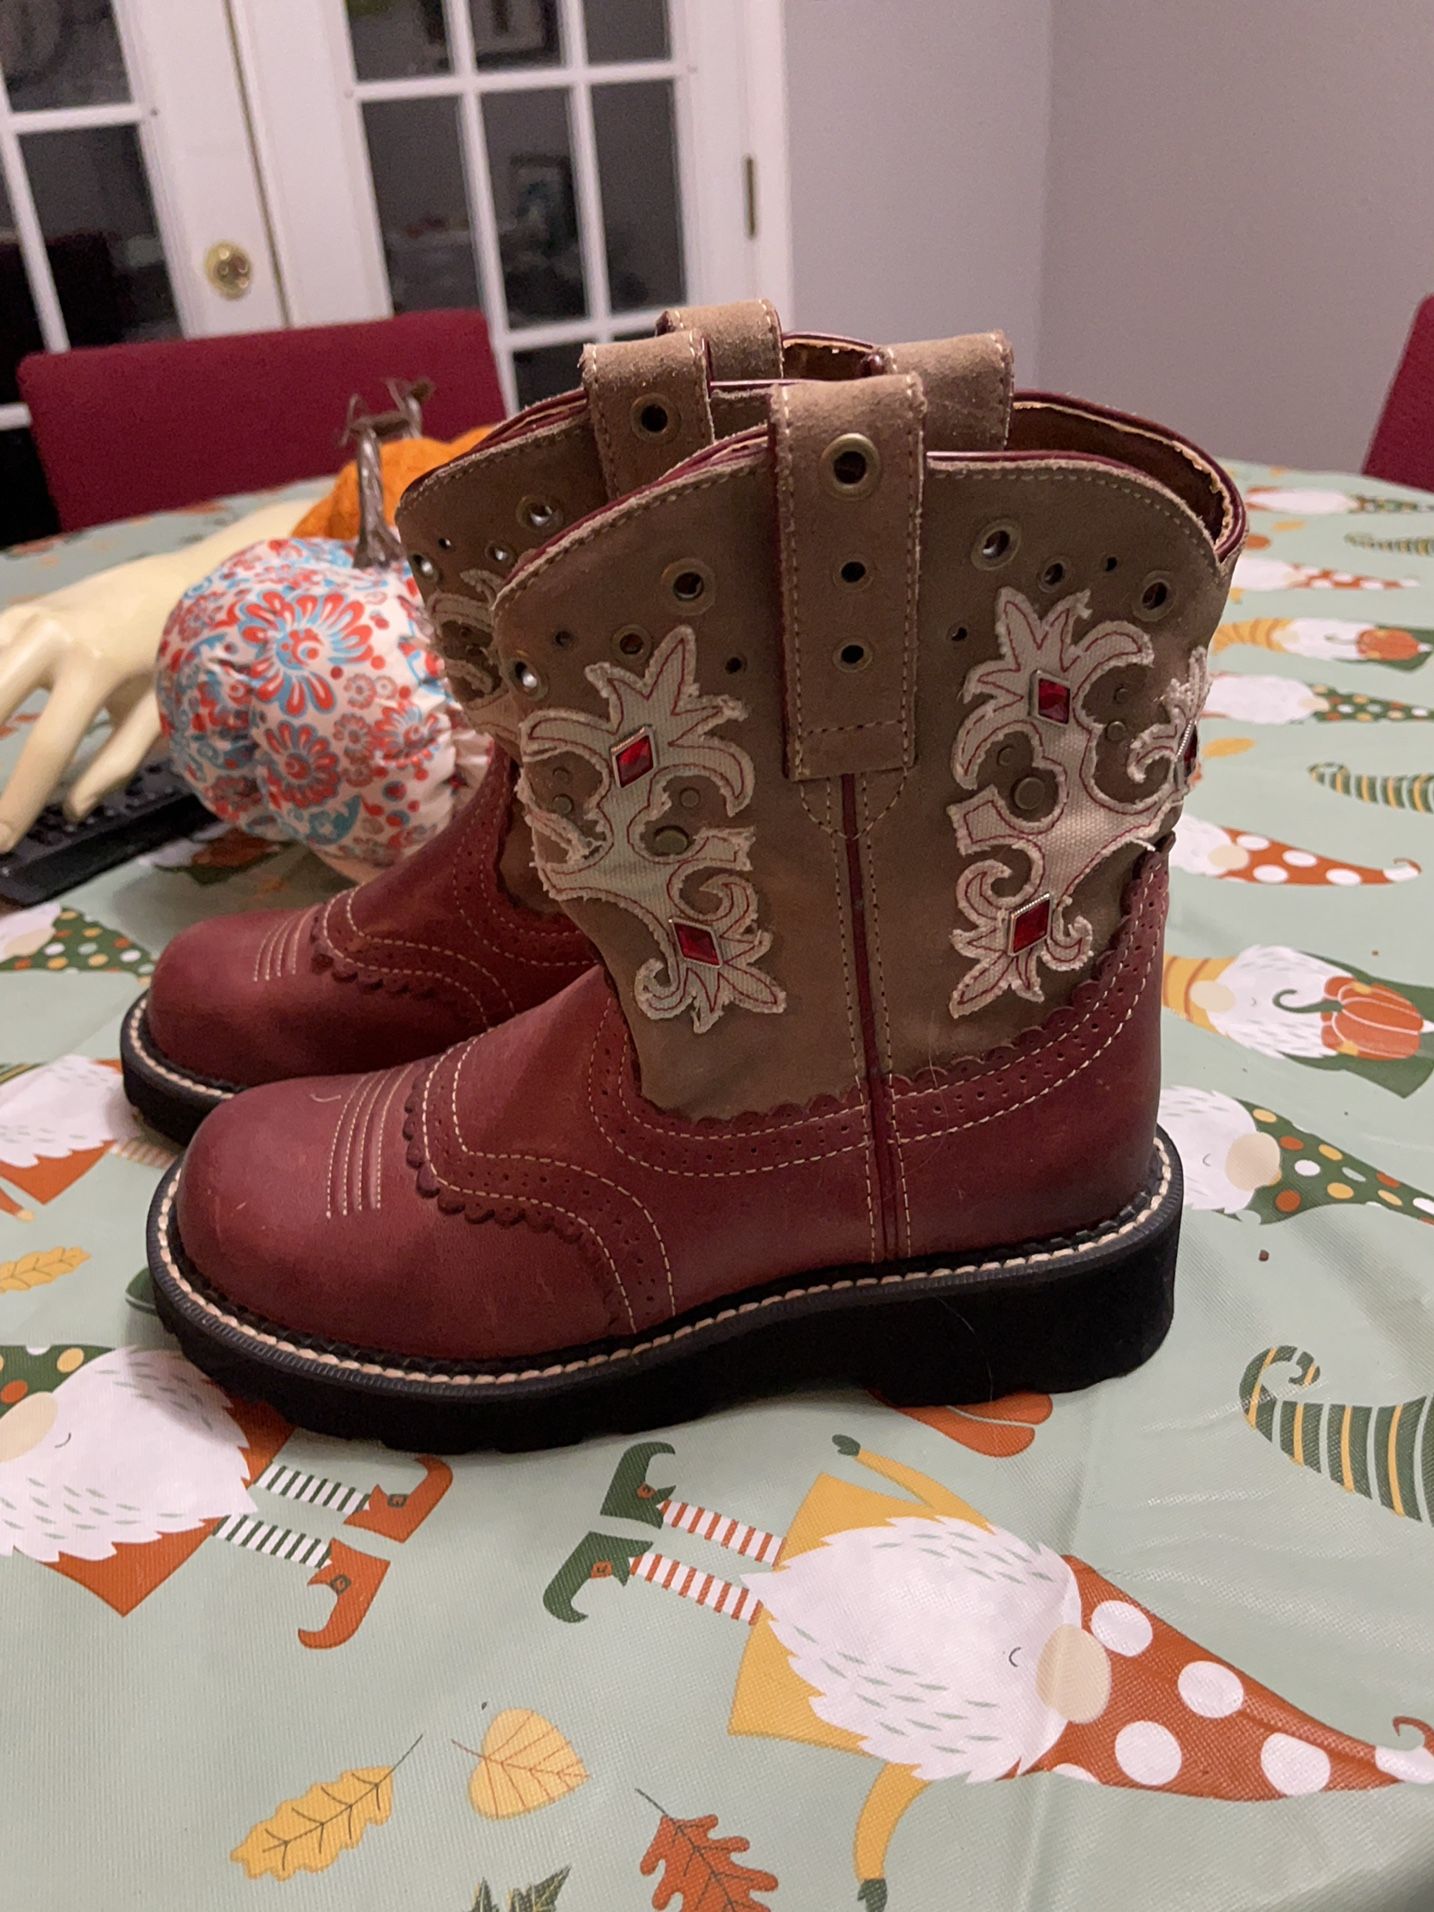 New Fat baby’s Boots 